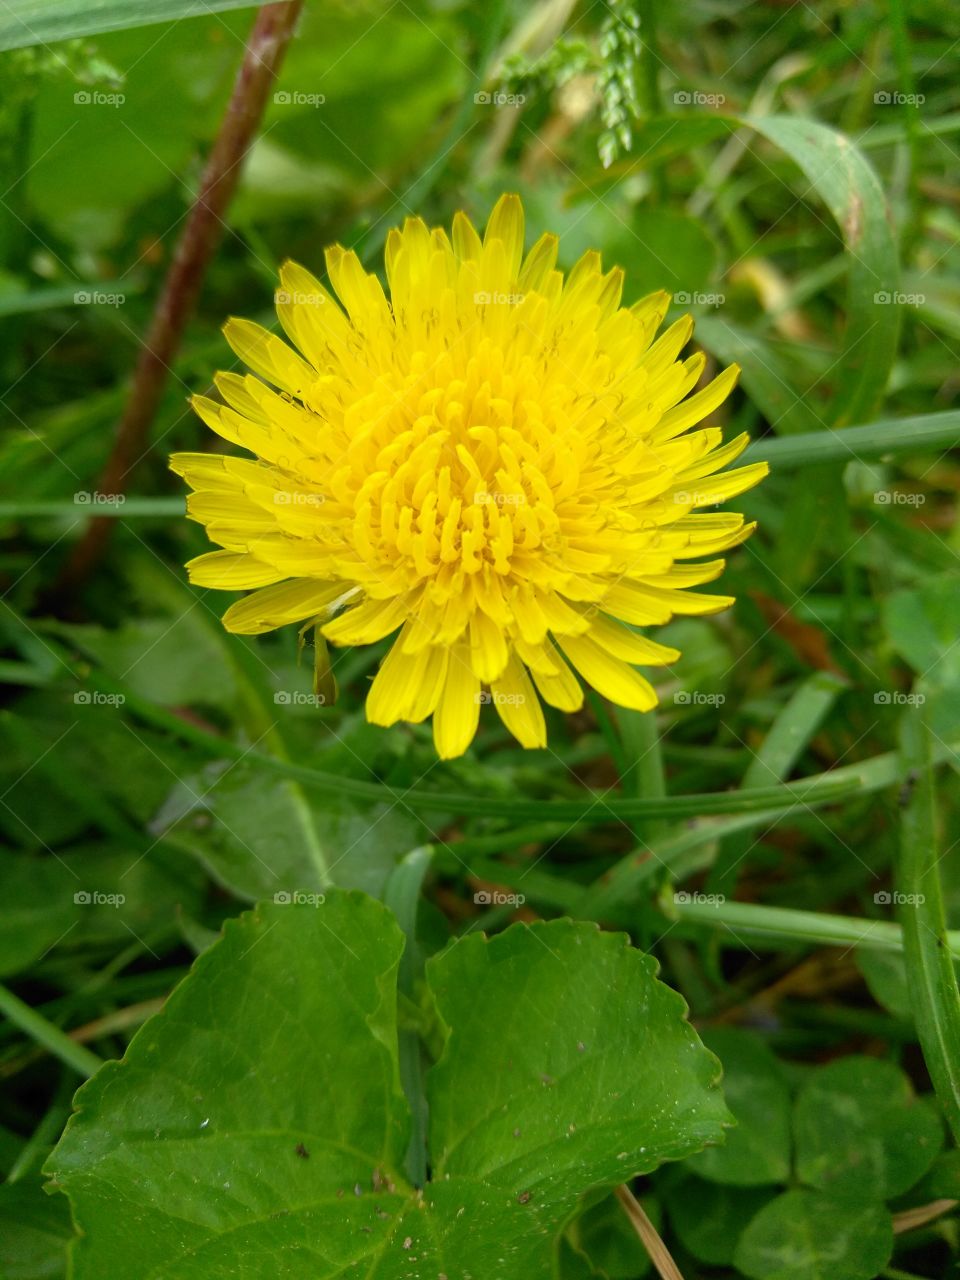 It's sure does amaze me how such a small simple weed can put the most beautiful shade of yellow in your yard